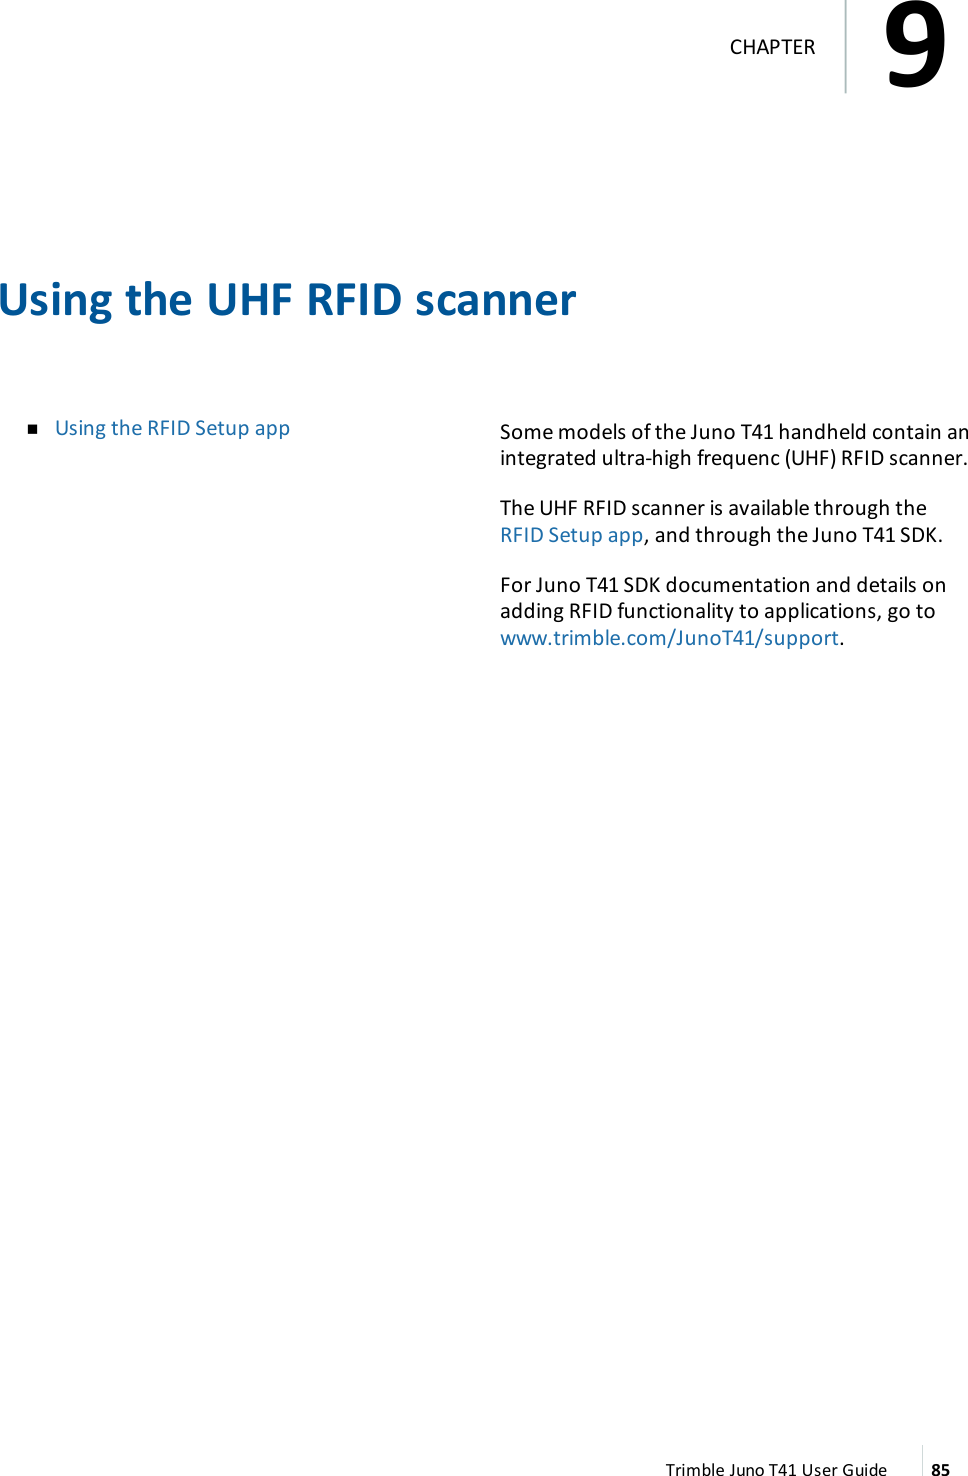 Using the UHF RFIDscannernUsing the RFIDSetup app Some models of the Juno T41 handheld contain anintegrated ultra-high frequenc (UHF)RFIDscanner.The UHF RFIDscanner is available through theRFIDSetup app, and through the Juno T41 SDK.For Juno T41 SDK documentation and details onadding RFIDfunctionality to applications, go towww.trimble.com/JunoT41/support.Trimble Juno T41 User Guide 859CHAPTER